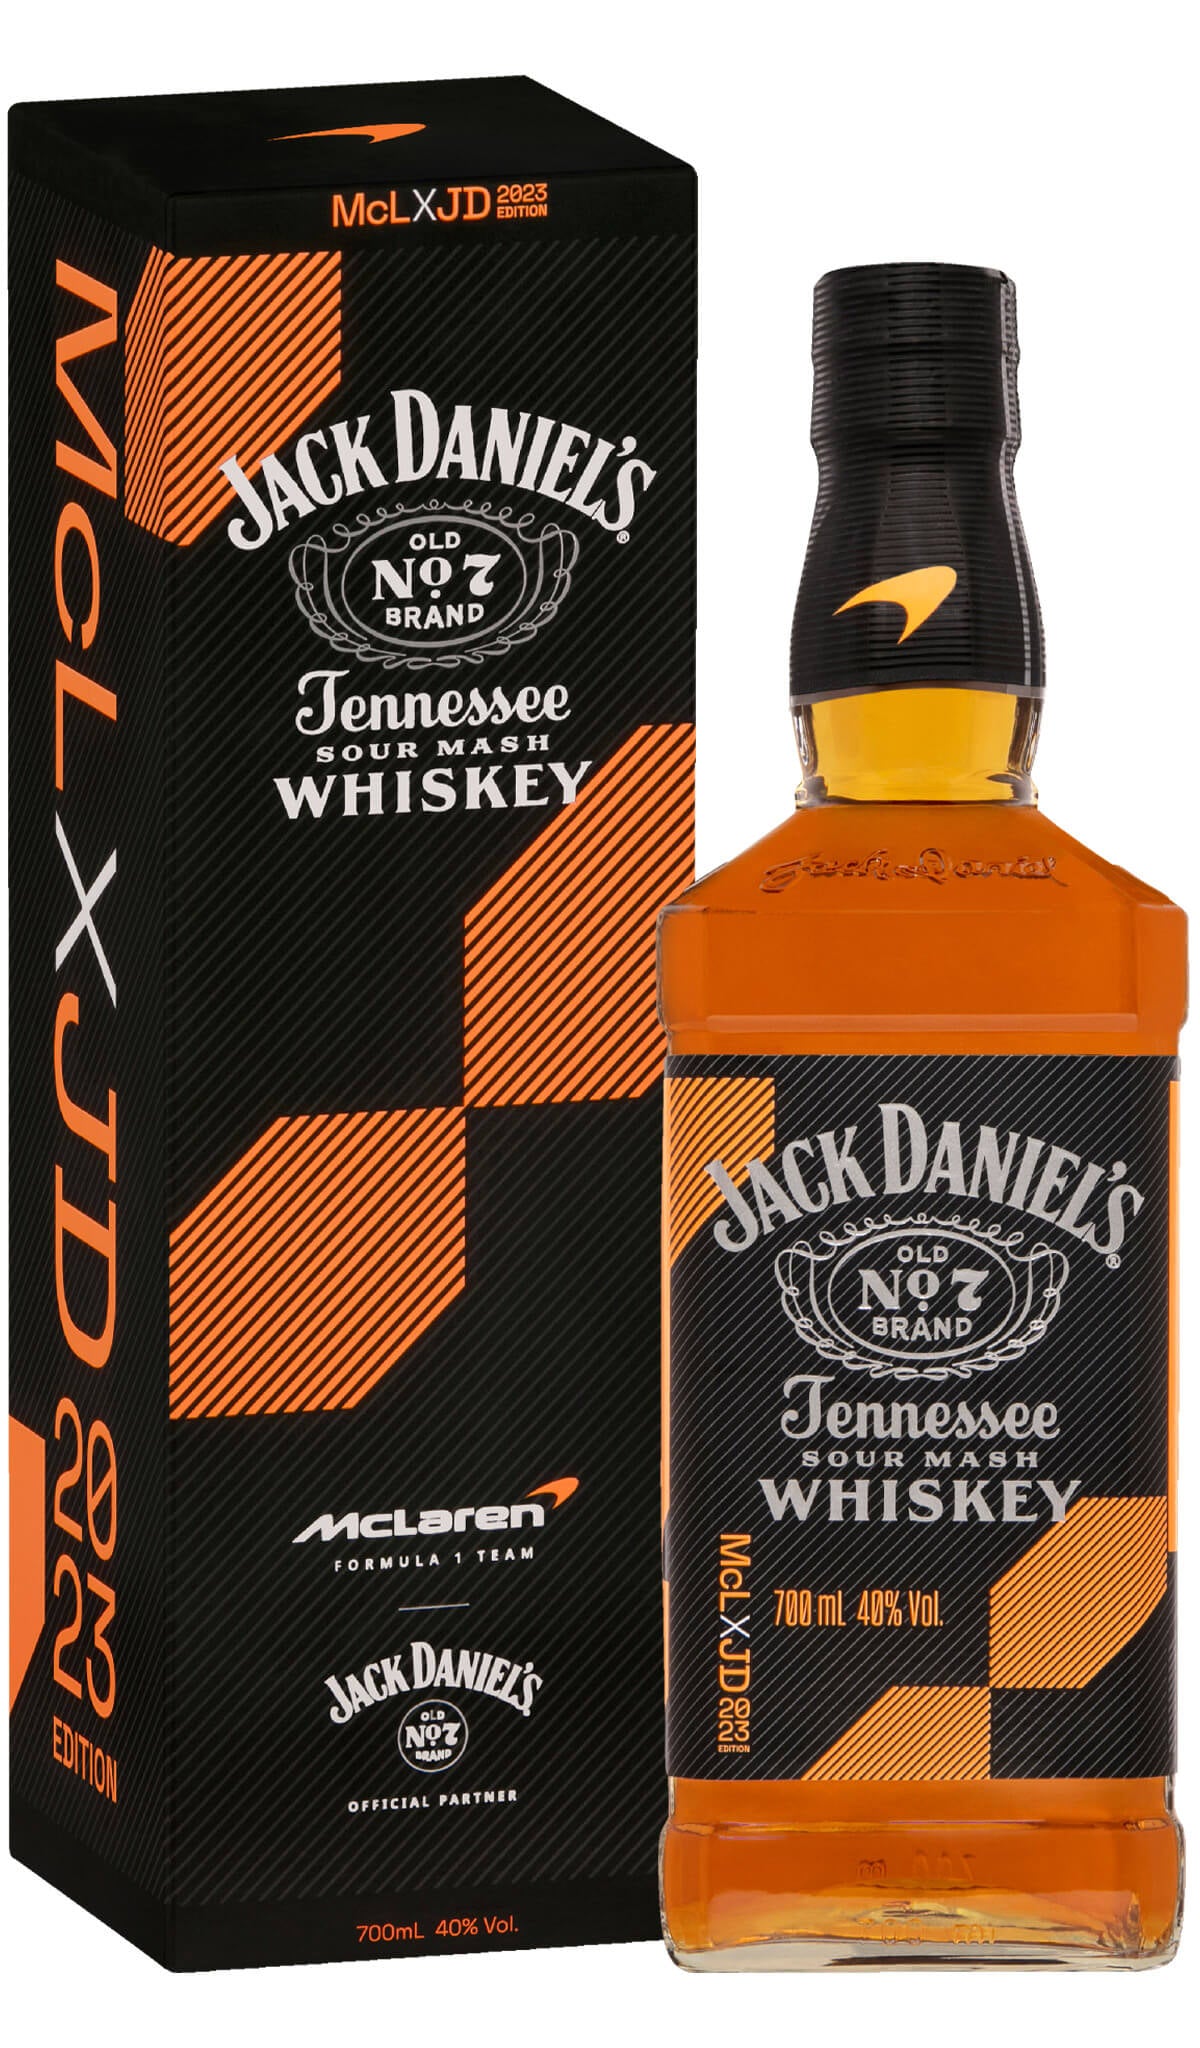 Find out more or buy Jack Daniel's Limited Edition McLaren F1 McL X JD 2023 Old No7 700ml online at Wine Sellers Direct - Australia’s independent liquor specialists.